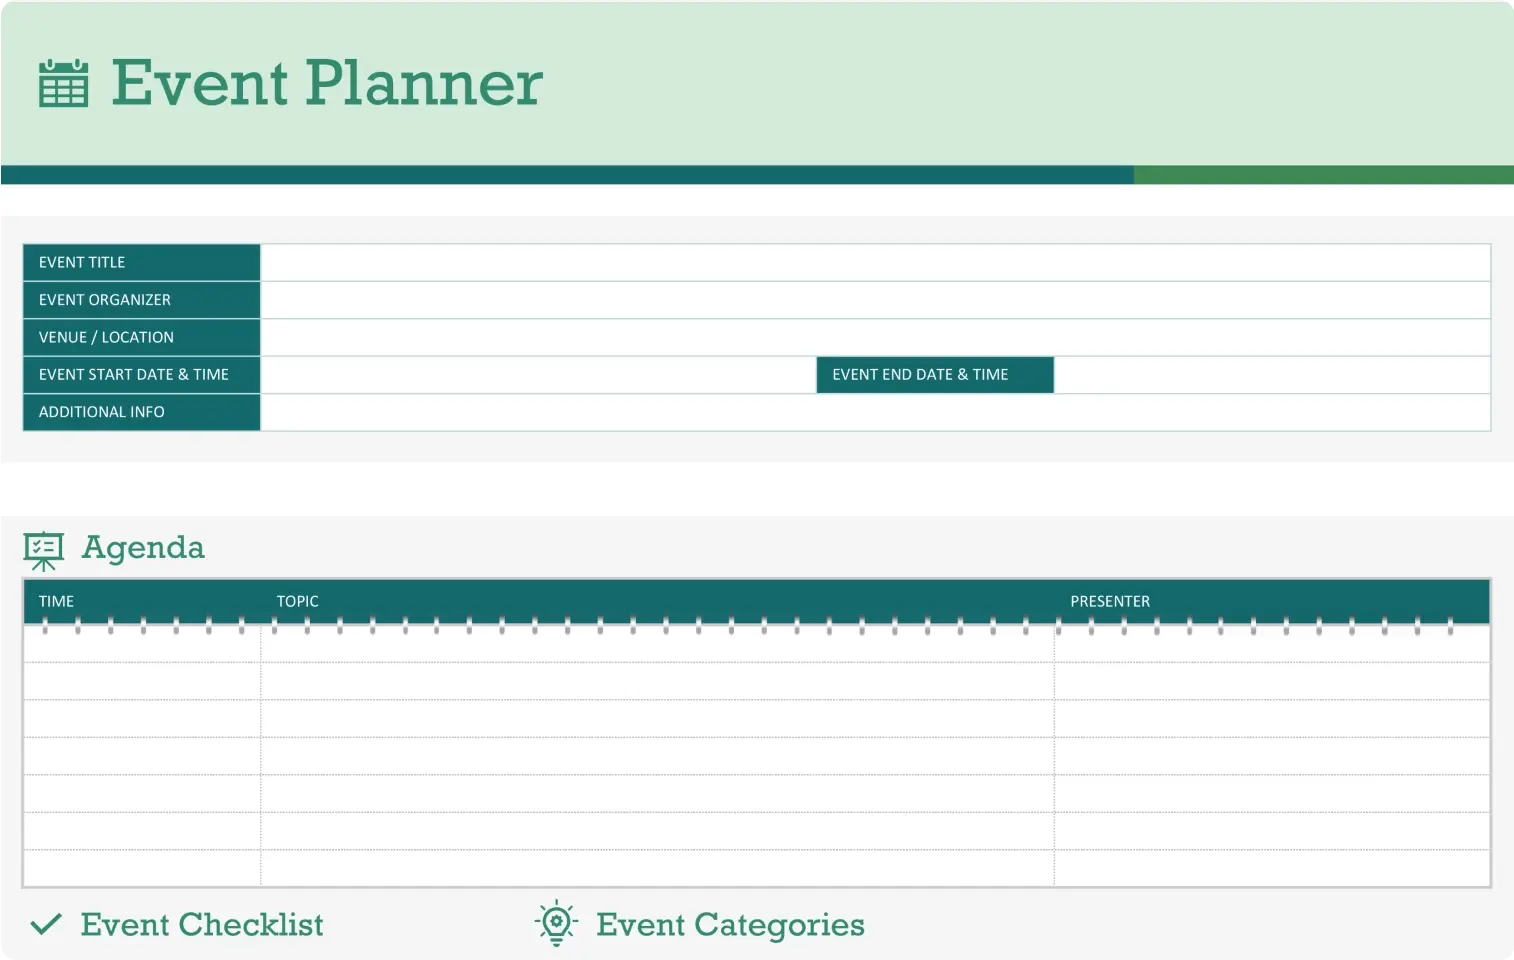 An image of an Excel event planning template